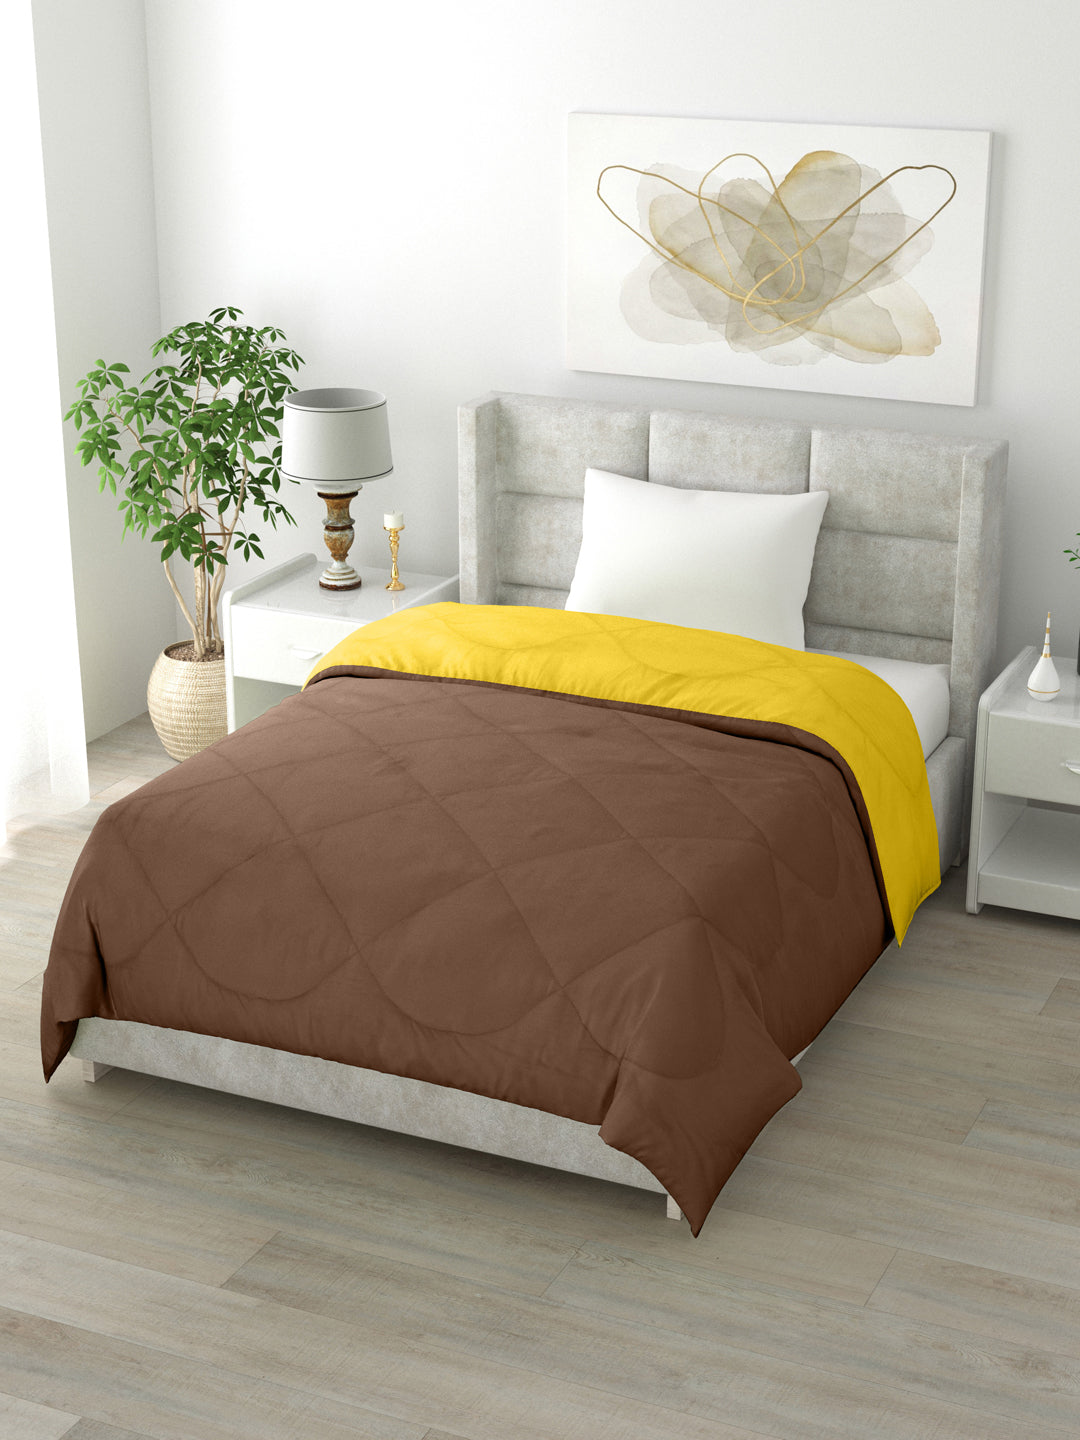 Reversible Single Bed Comforter 200 GSM 60x90 Inches (Yellow & Brown)